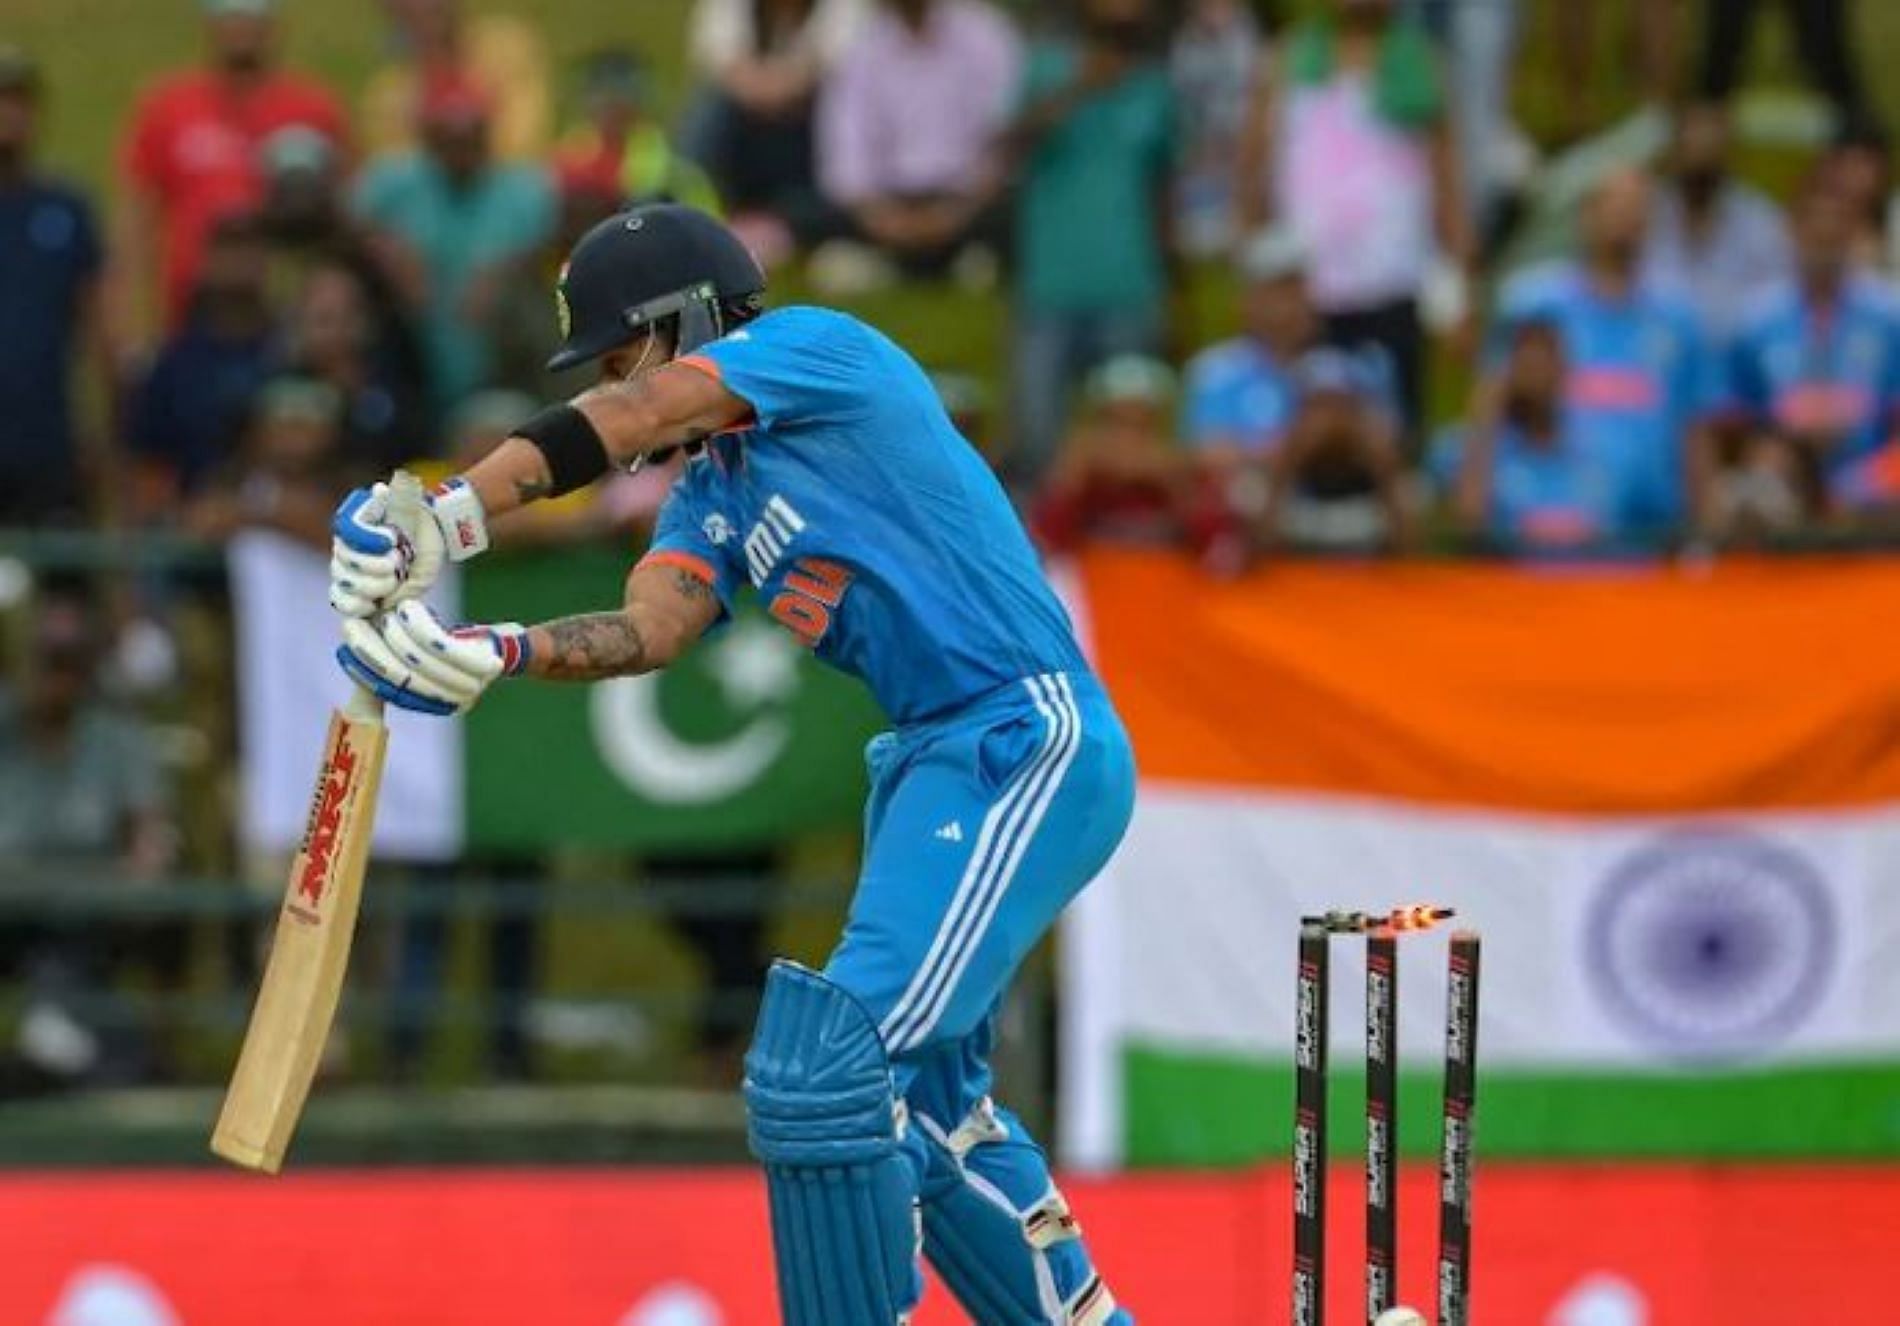 Kohli was dismissed inside the powerplay in the first Pakistan match of the Asia Cup.